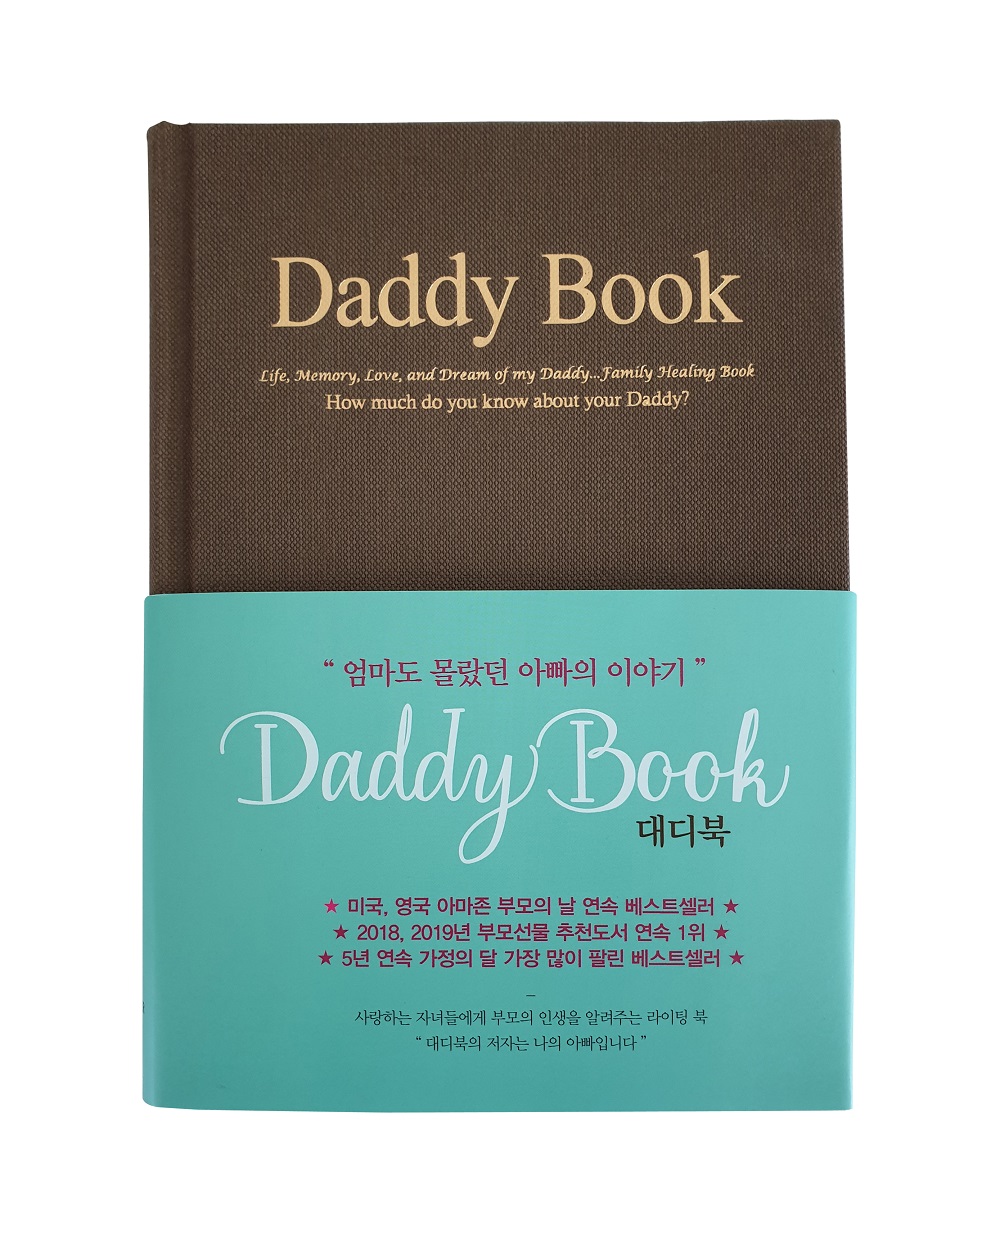   Daddy Book